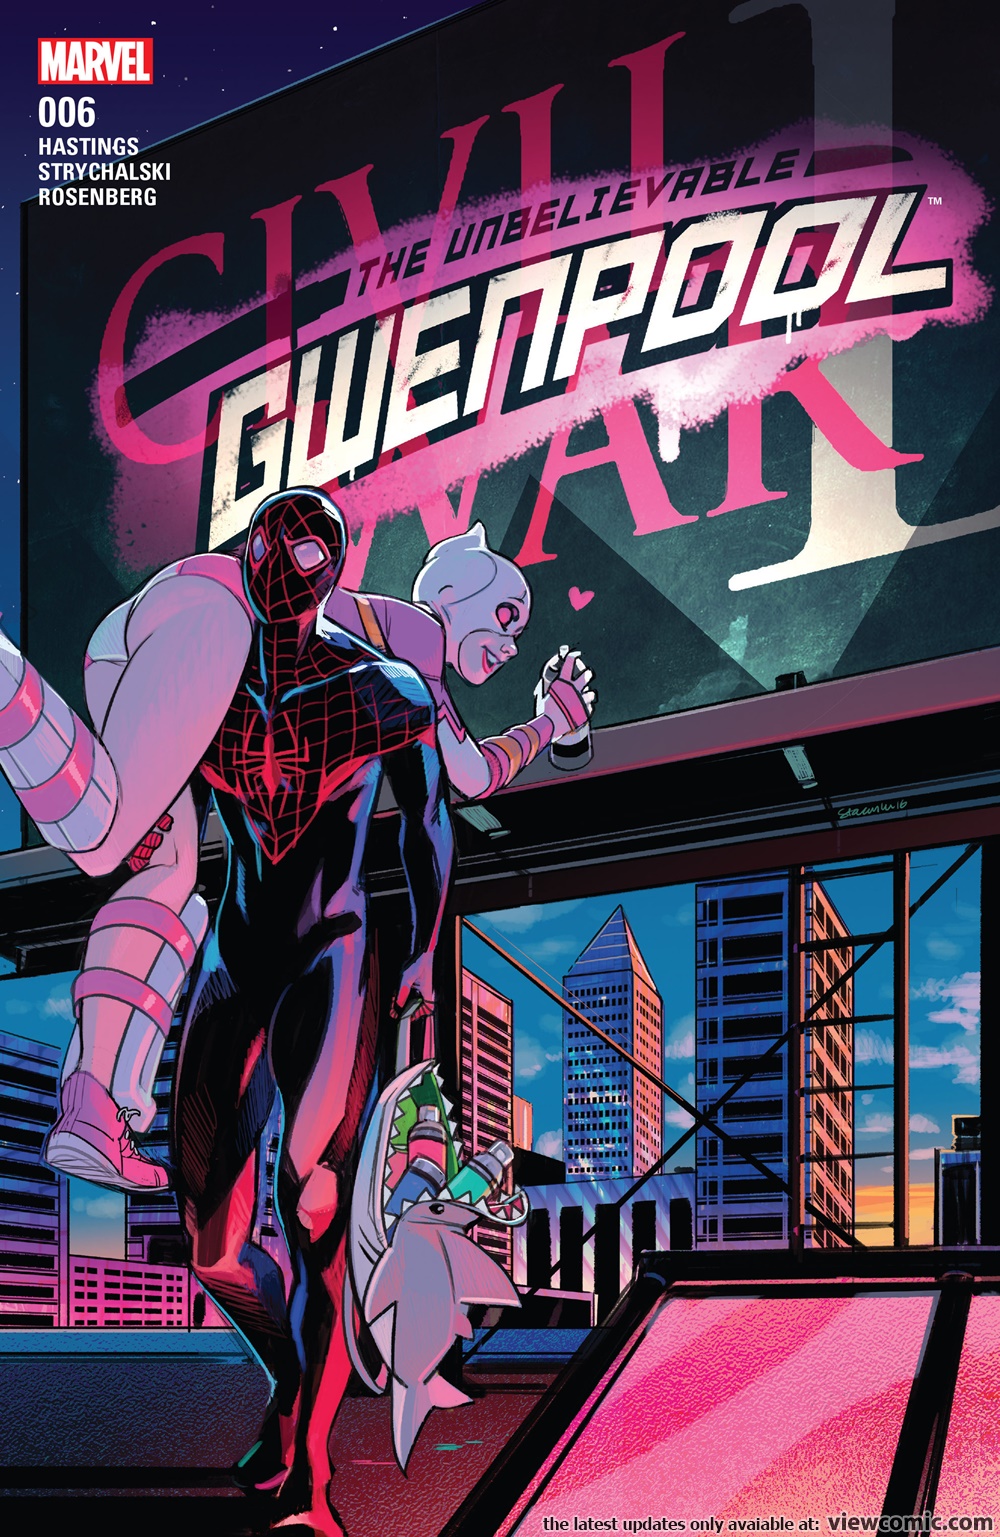 The Unbelievable Gwenpool 006 2016 | Read The Unbelievable Gwenpool 006  2016 comic online in high quality. Read Full Comic online for free - Read  comics online in high quality .|viewcomiconline.com